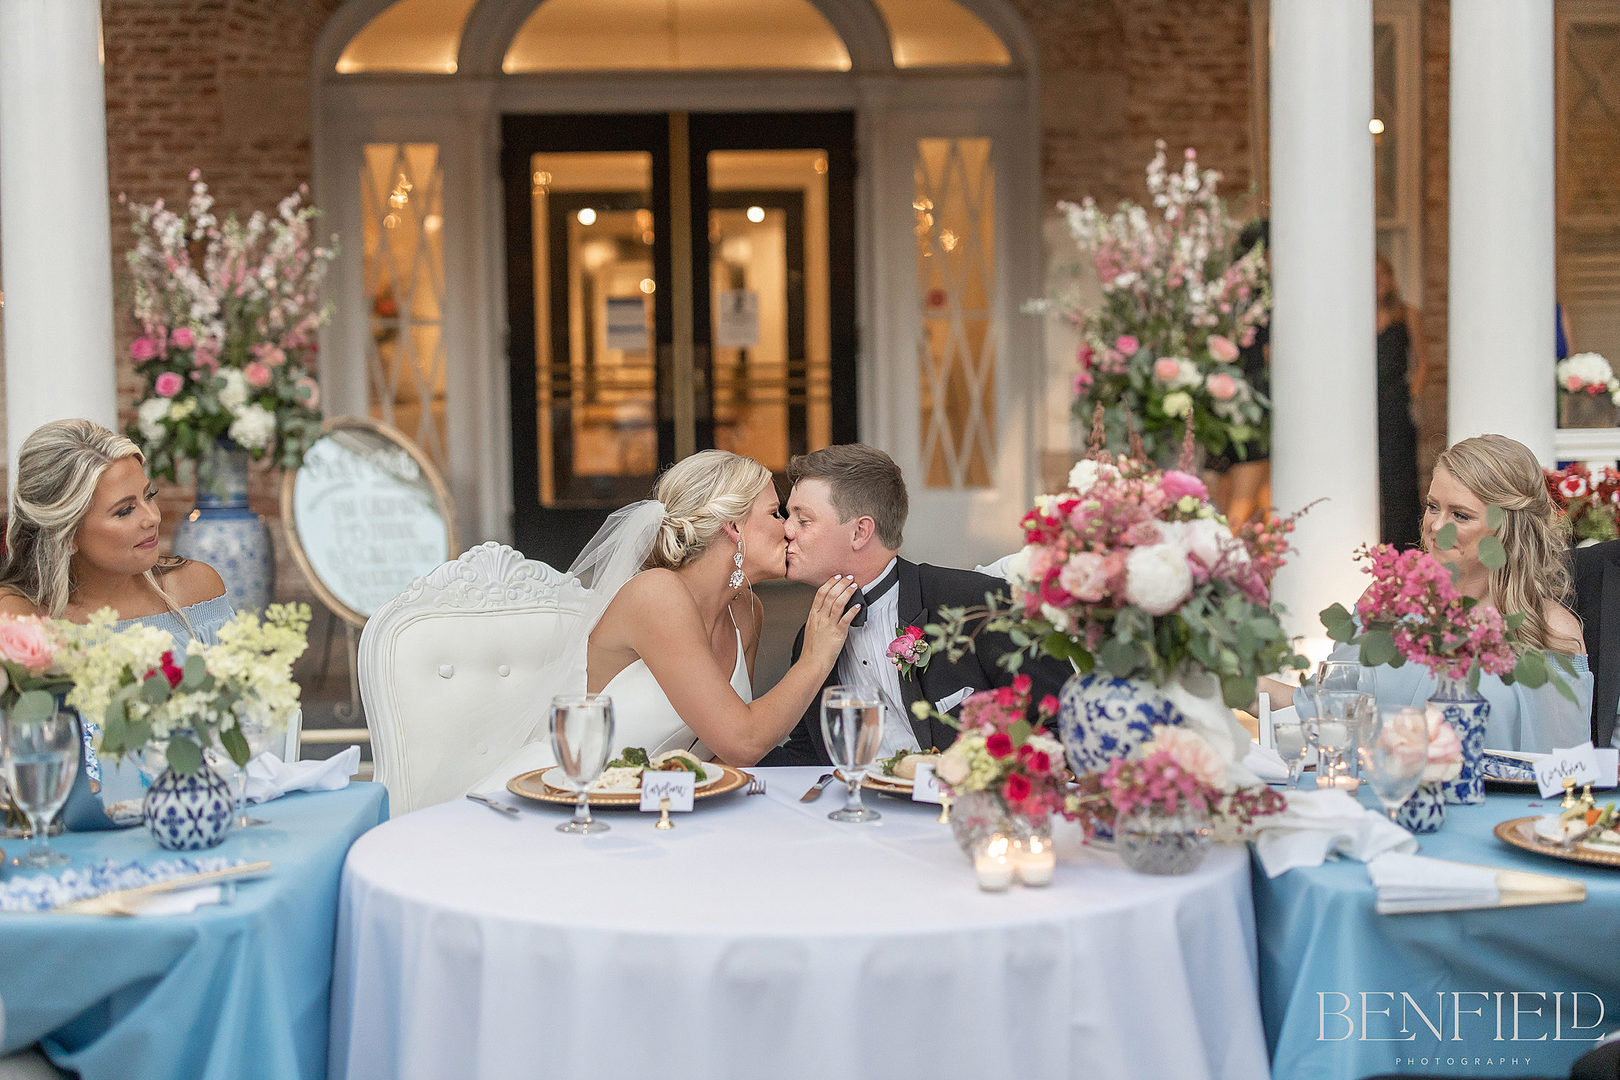 Luxury wedding photograher in NW Arkansas captures incredible shot of bride and groom kissing at the Inn at Carnall Hall in Fayetteville for their wedding reception.